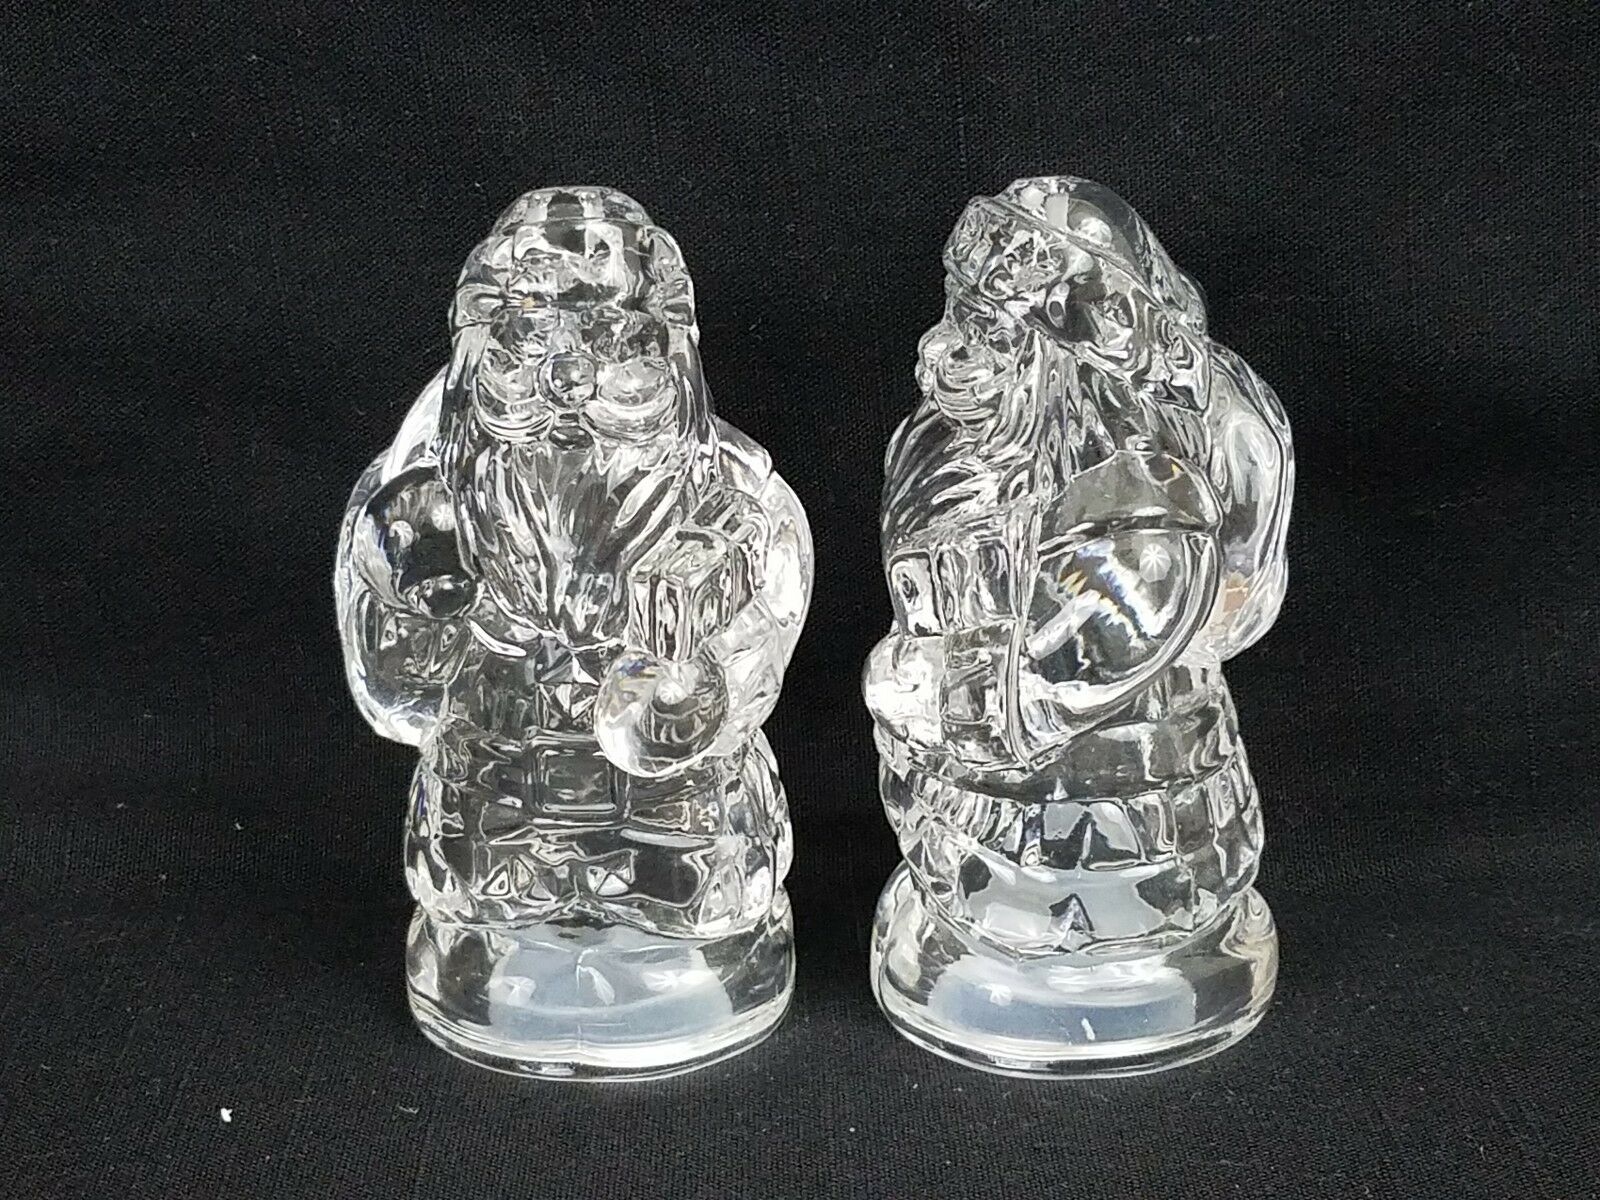 New Gorham Crystal Emily's Attic Santa Claus Salt And Pepper Shakers